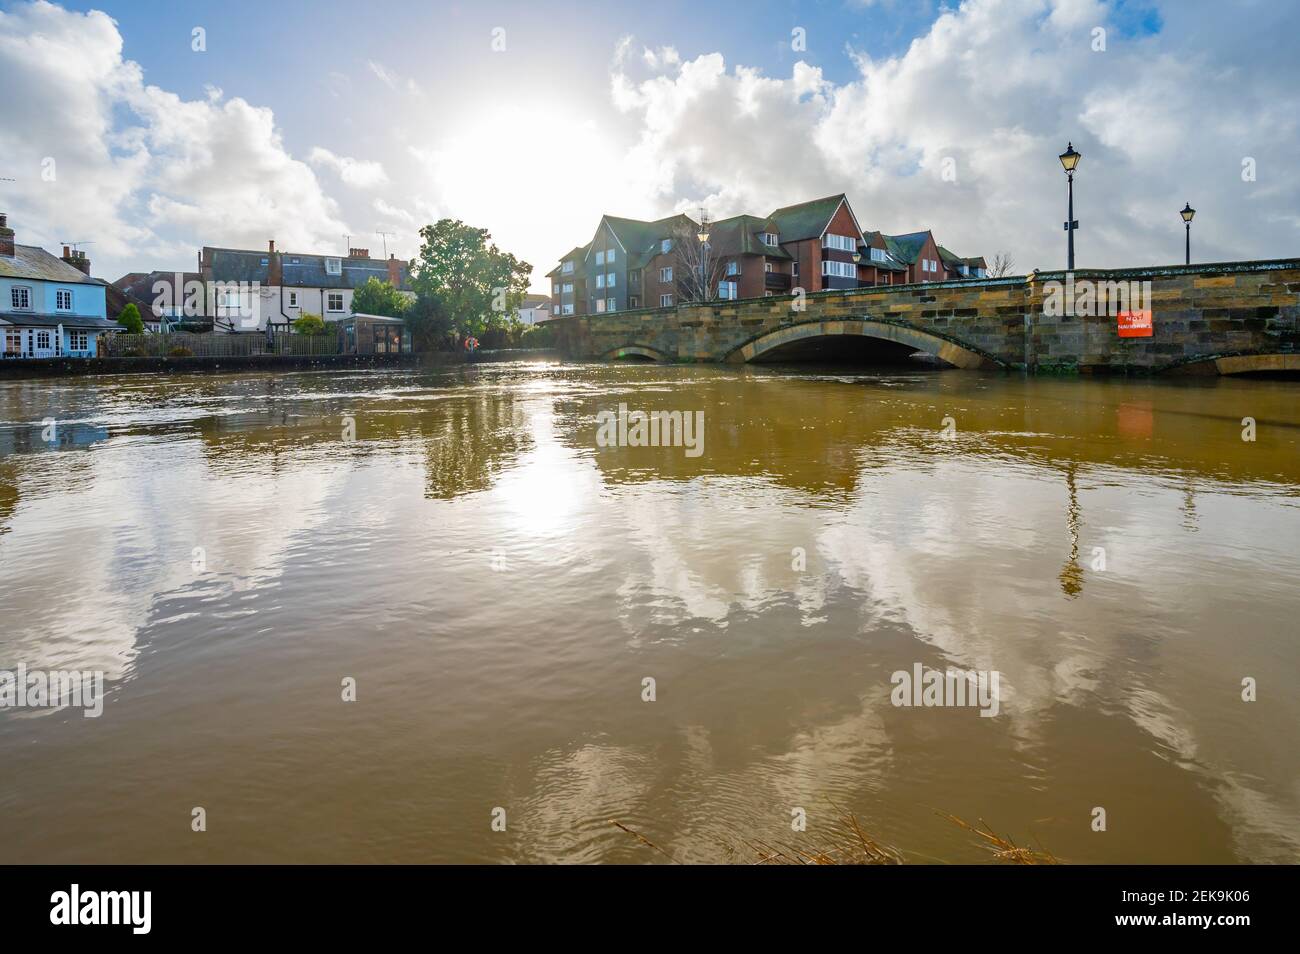 Unusually very high water showing flooding of the River Arun during a freak high tide in Winter in Arundel, West Sussex, England, UK. Stock Photo